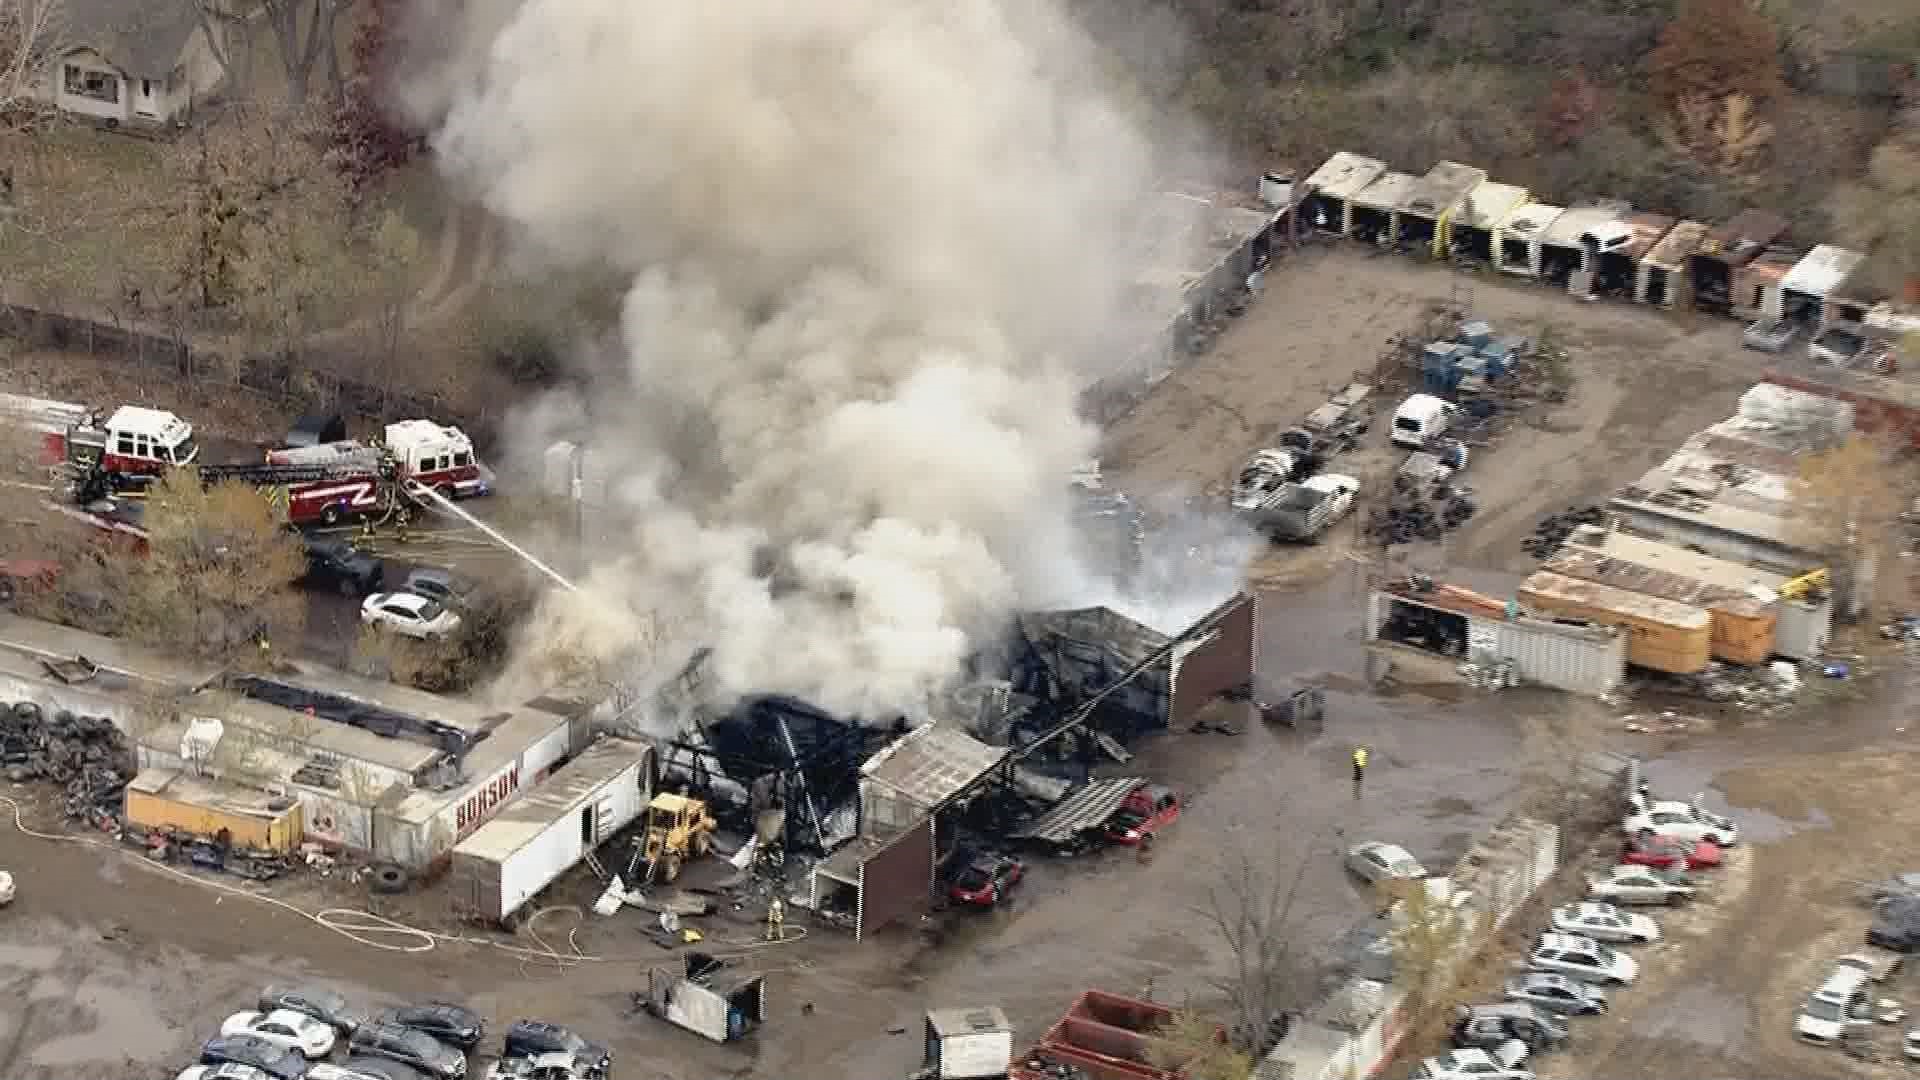 3-alarm fire breaks out at auto salvage business in Shakopee